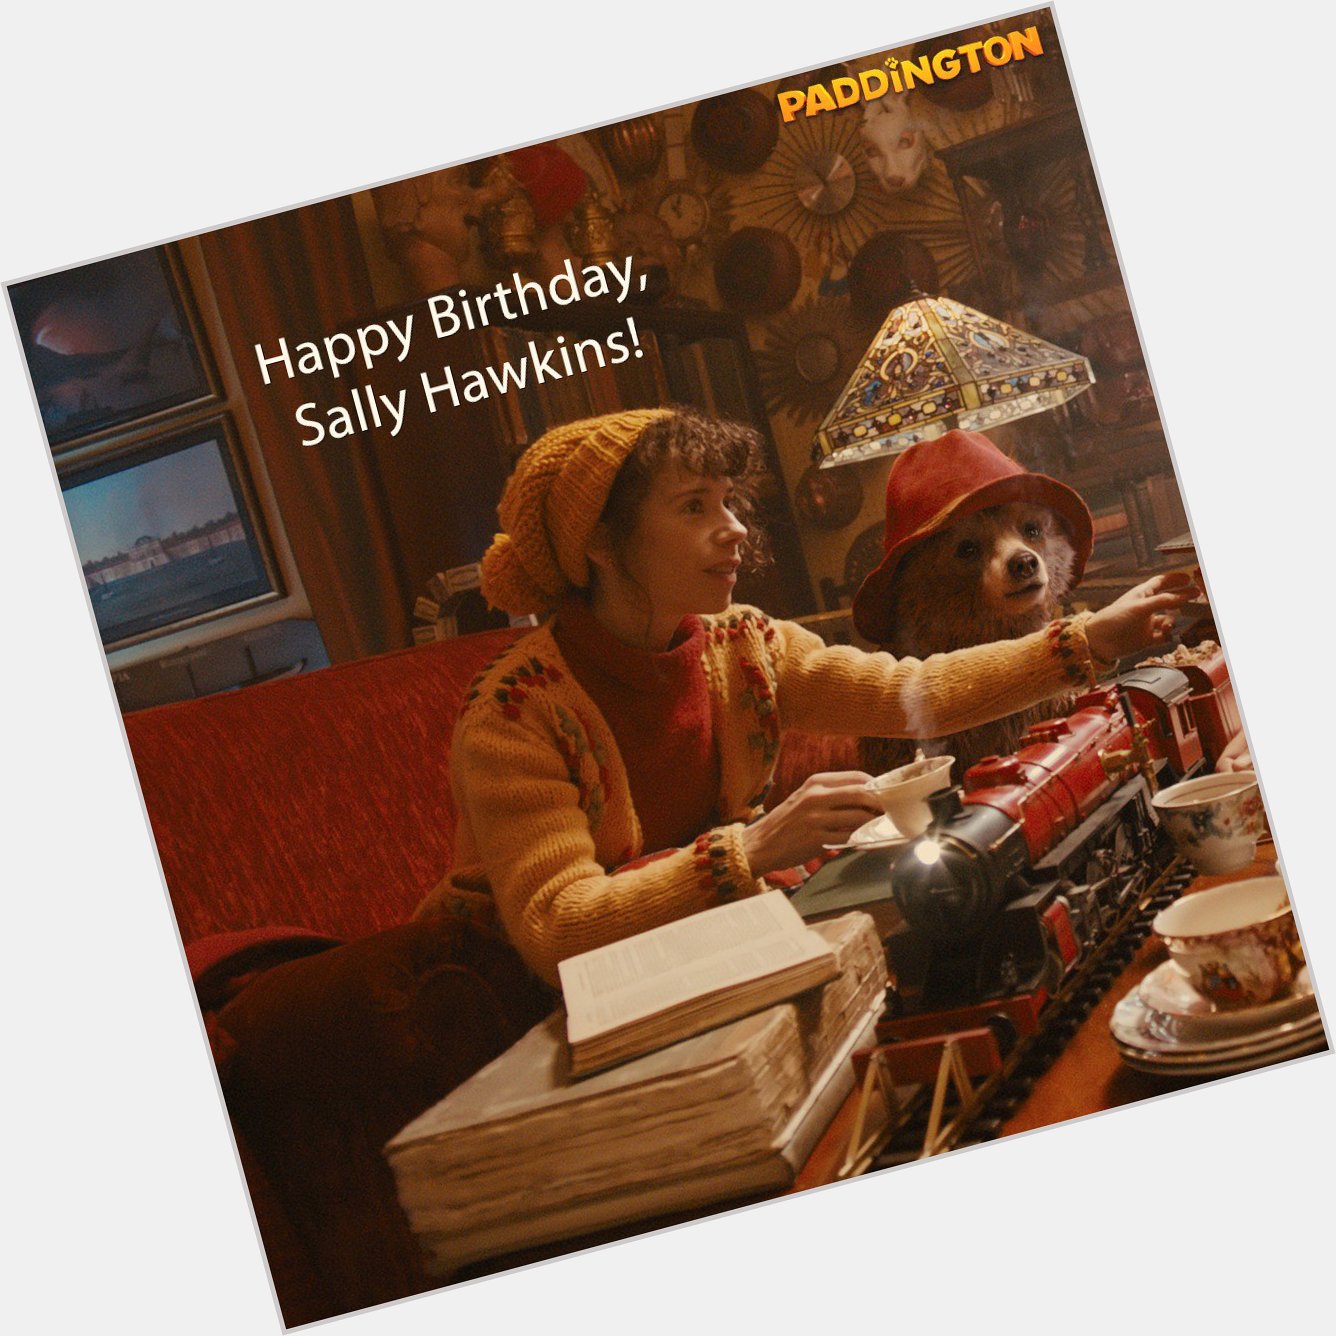 Happy birthday Sally Hawkins! We hope it\s filled with magic and smiles and unicorns.  Because well, unicorns. 